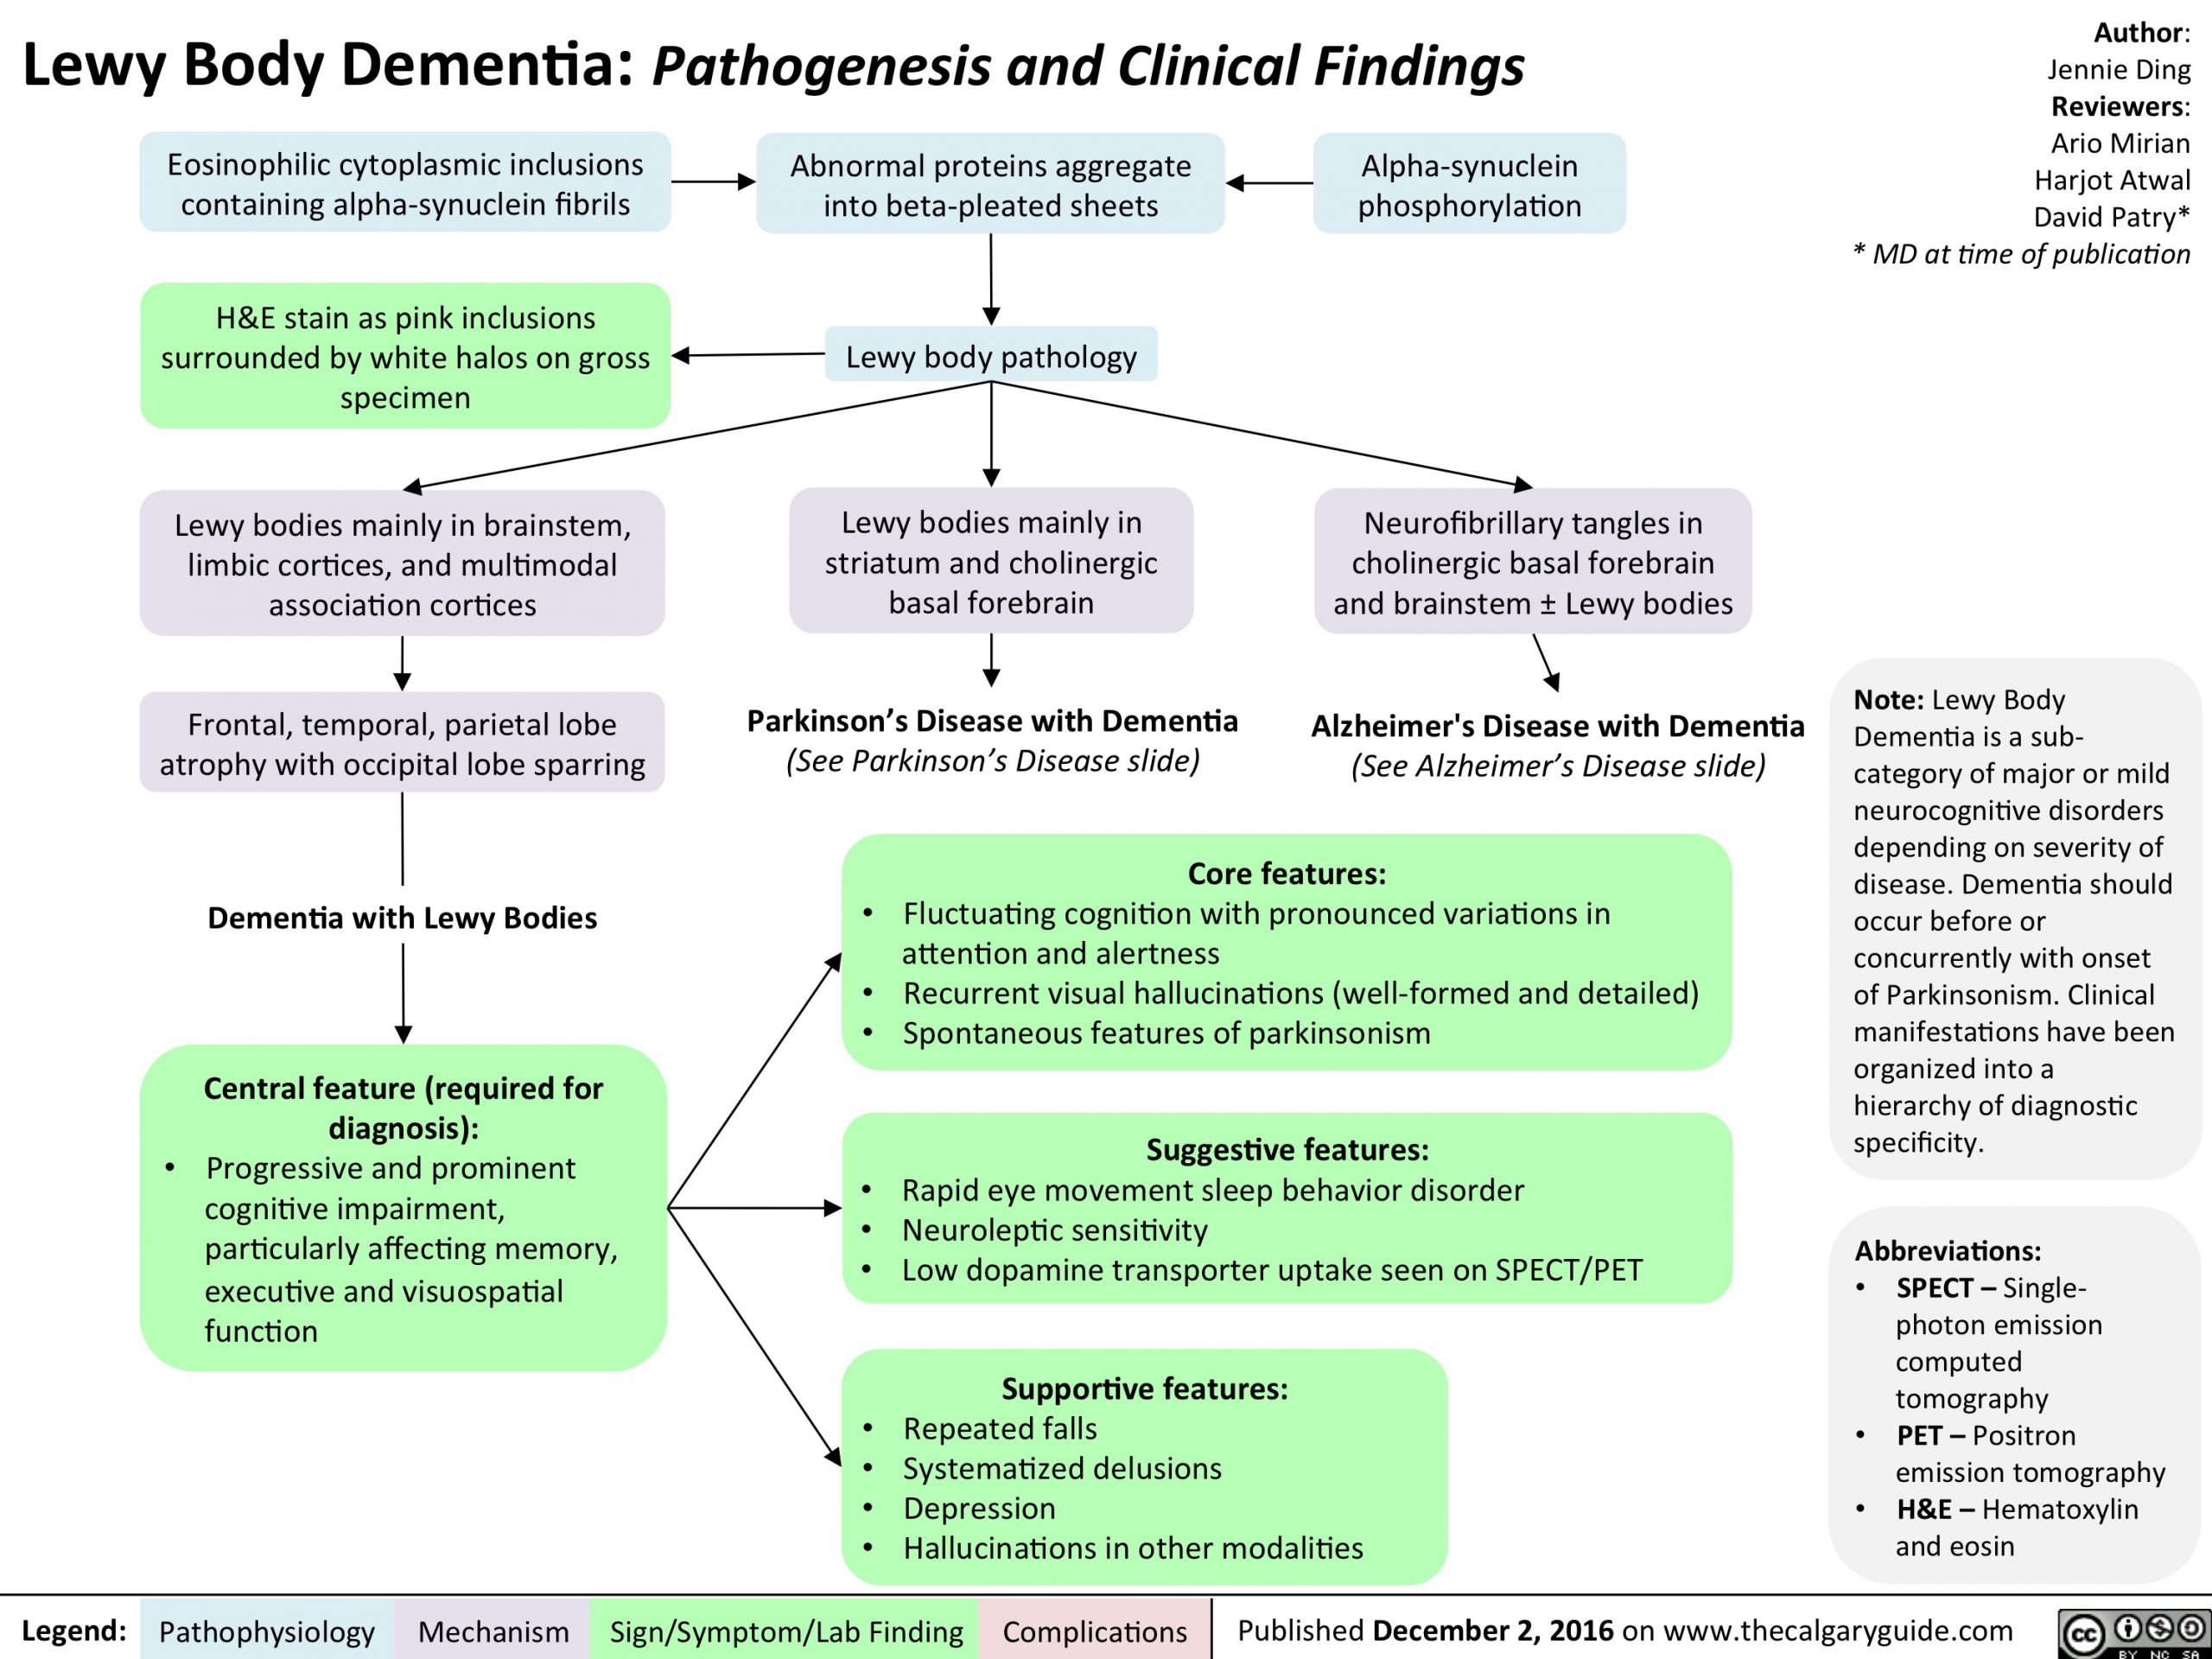 Lewy Body Dementia: Pathogenesis and Clinical Findings